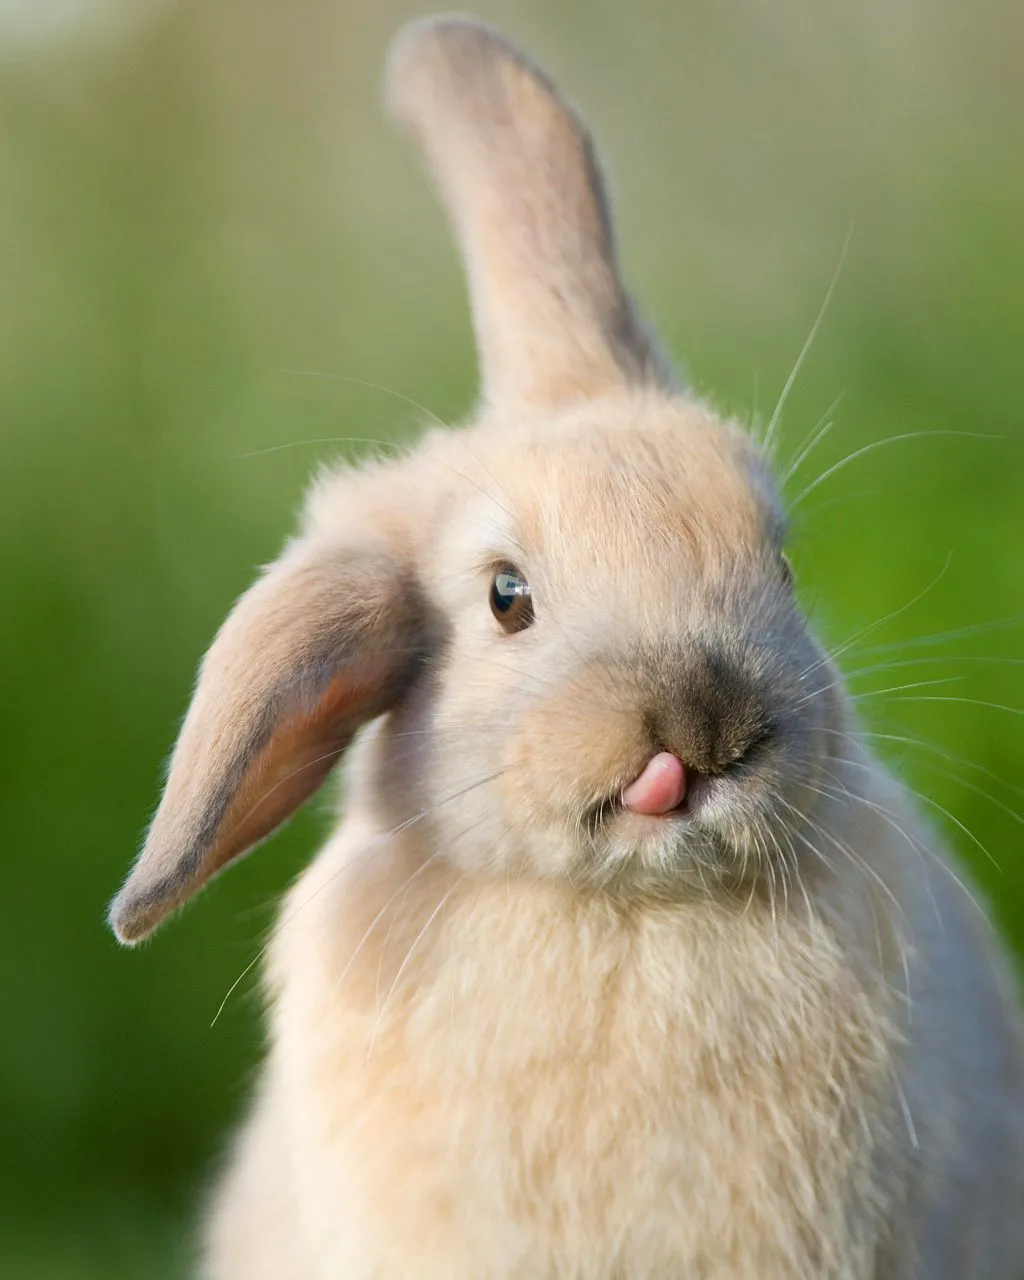 Genetically modified Rabbit with unexpectedly long tongue